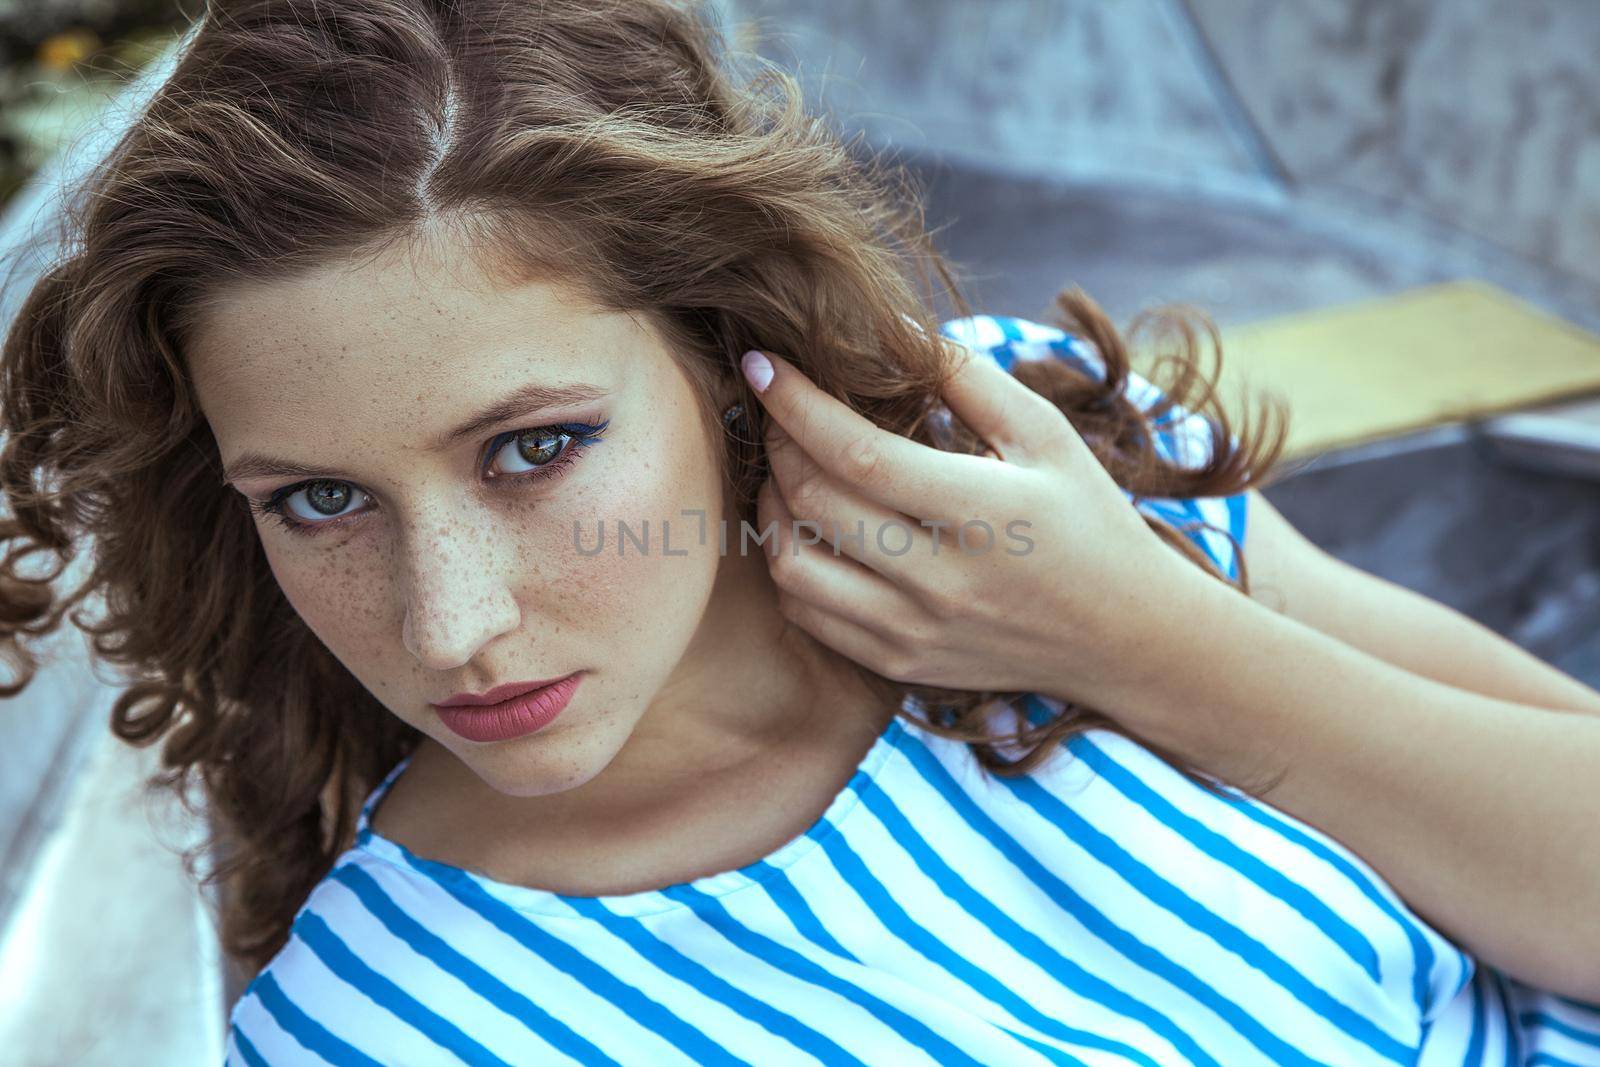 Beautiful young fashion model with freckles on her face and light blue striped dress and fashion makeup and hairstyle is lying down in metalic silver boat on lake, posing and looking at camera with blue eyes.